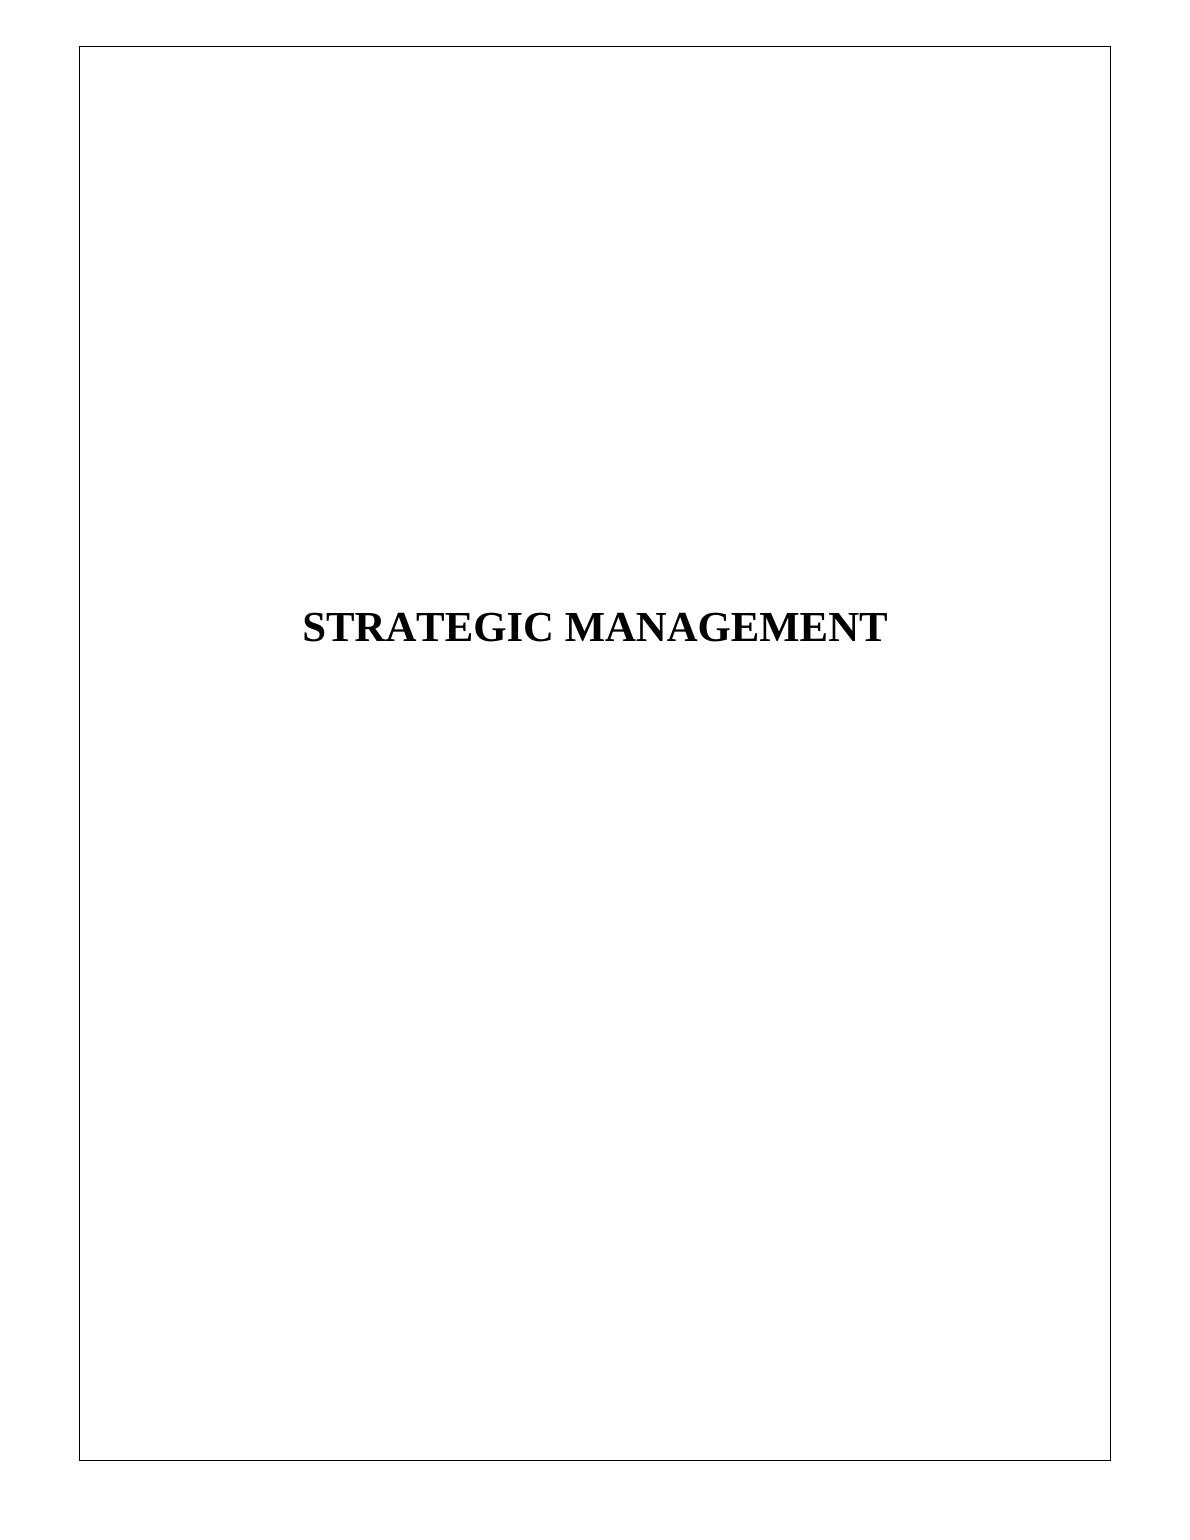 Assignment Report on the Strategic Management of Emirates Airlines_1